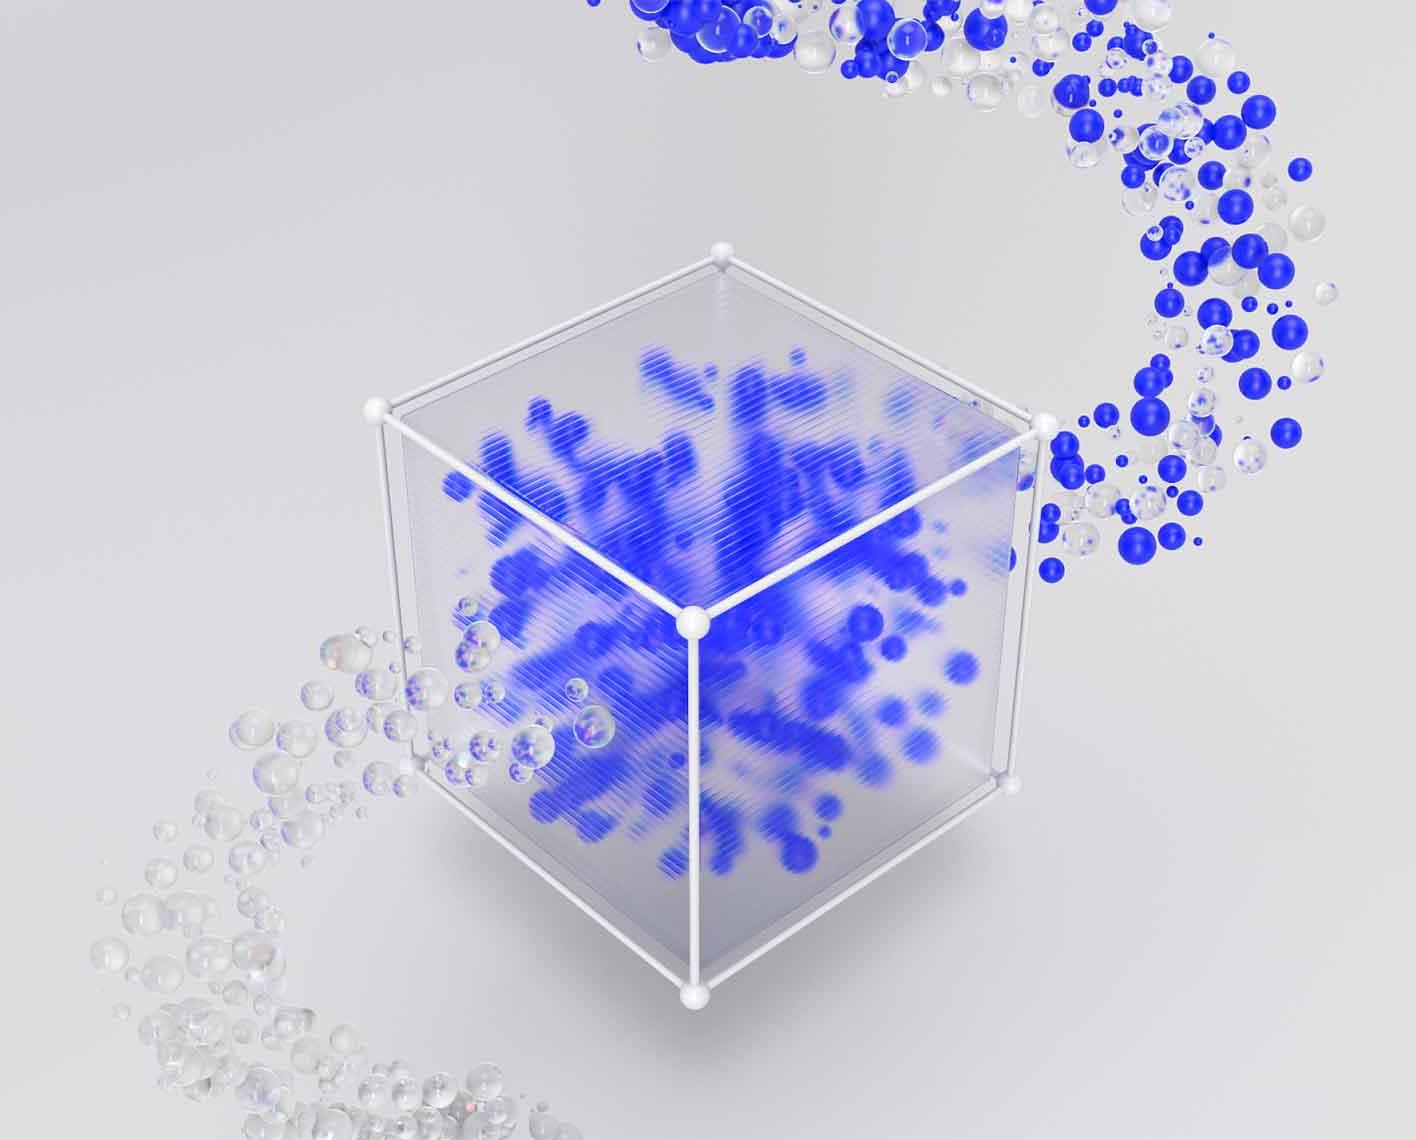 Blue and clear balls entering a translucent cube, blue ones are retained and clear ones flow out.